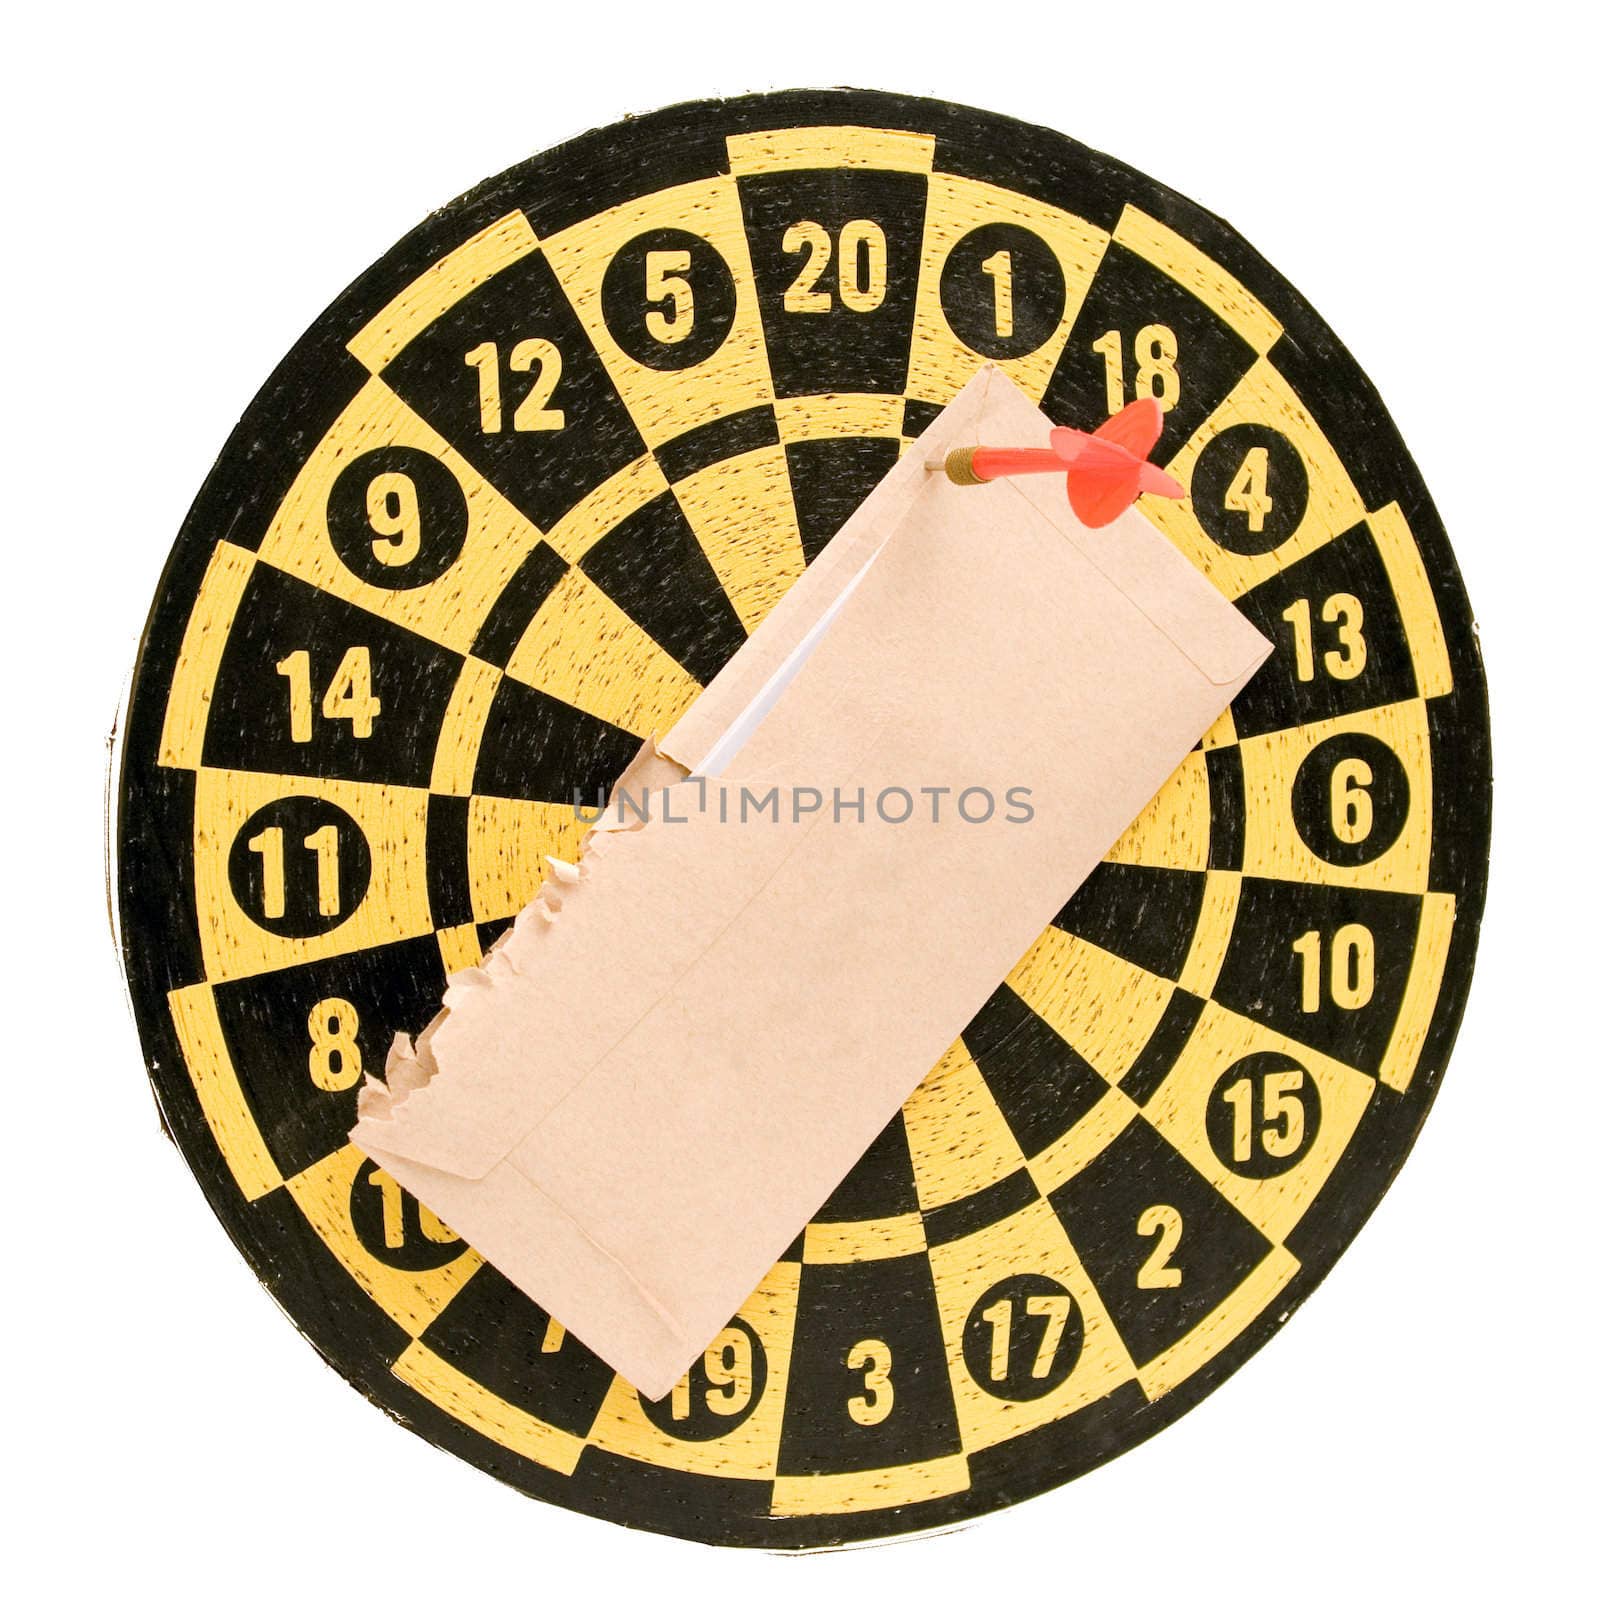 Unpaid bills stuck onto a dartboard with a dart, isolated against a white background